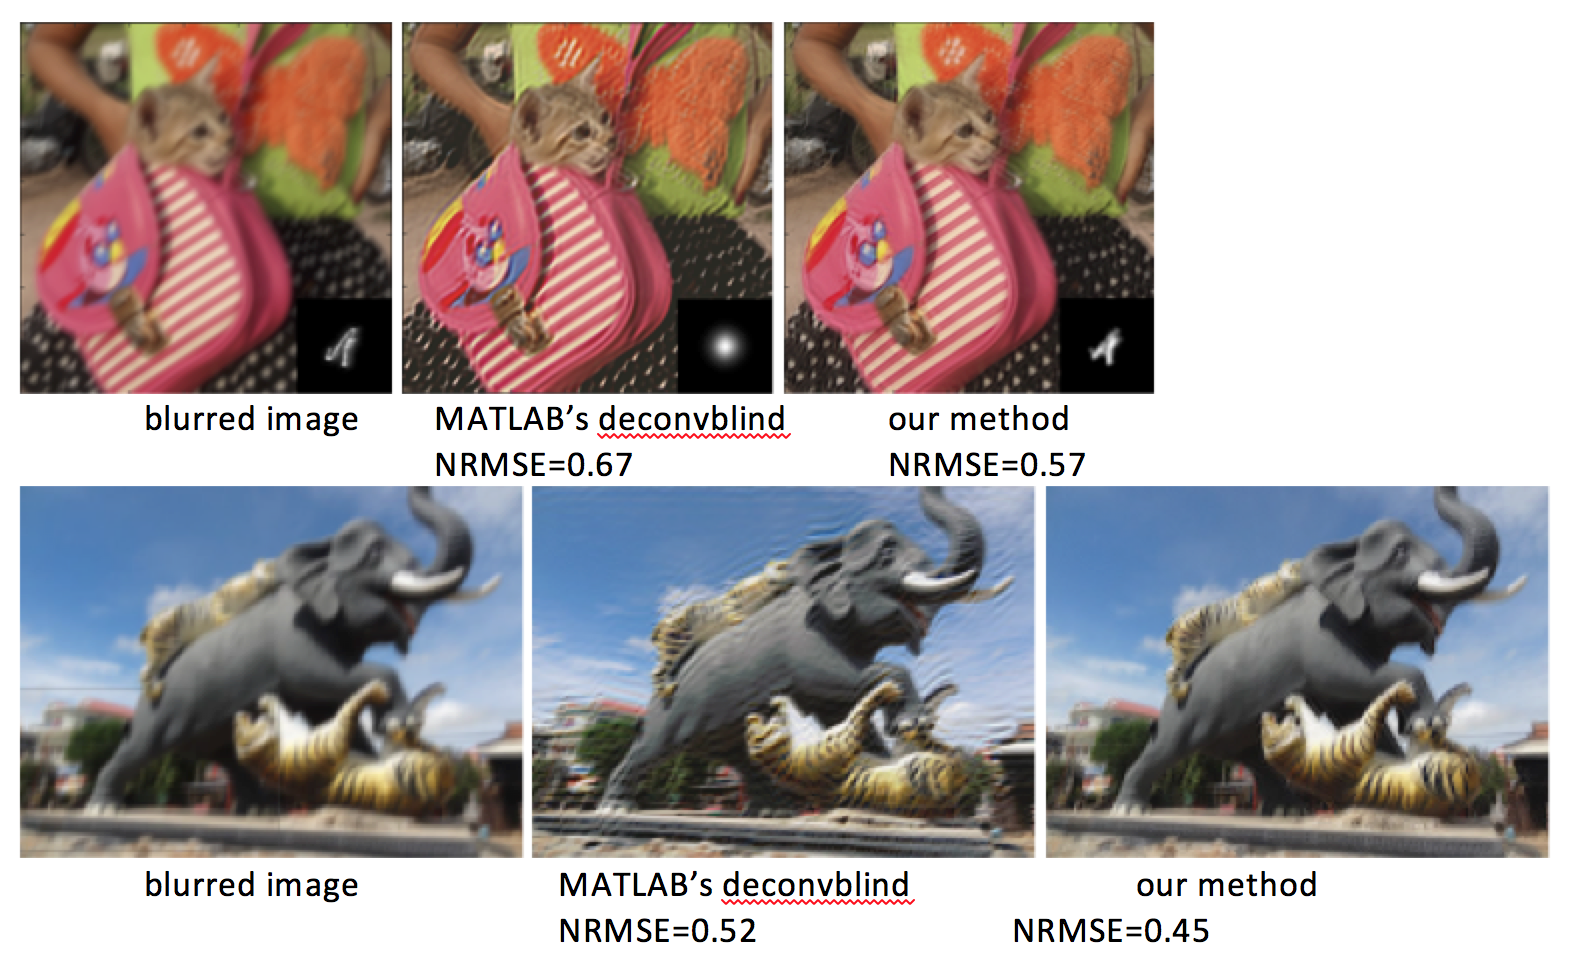 images showing the new method reduces the amount of blur better than current standards